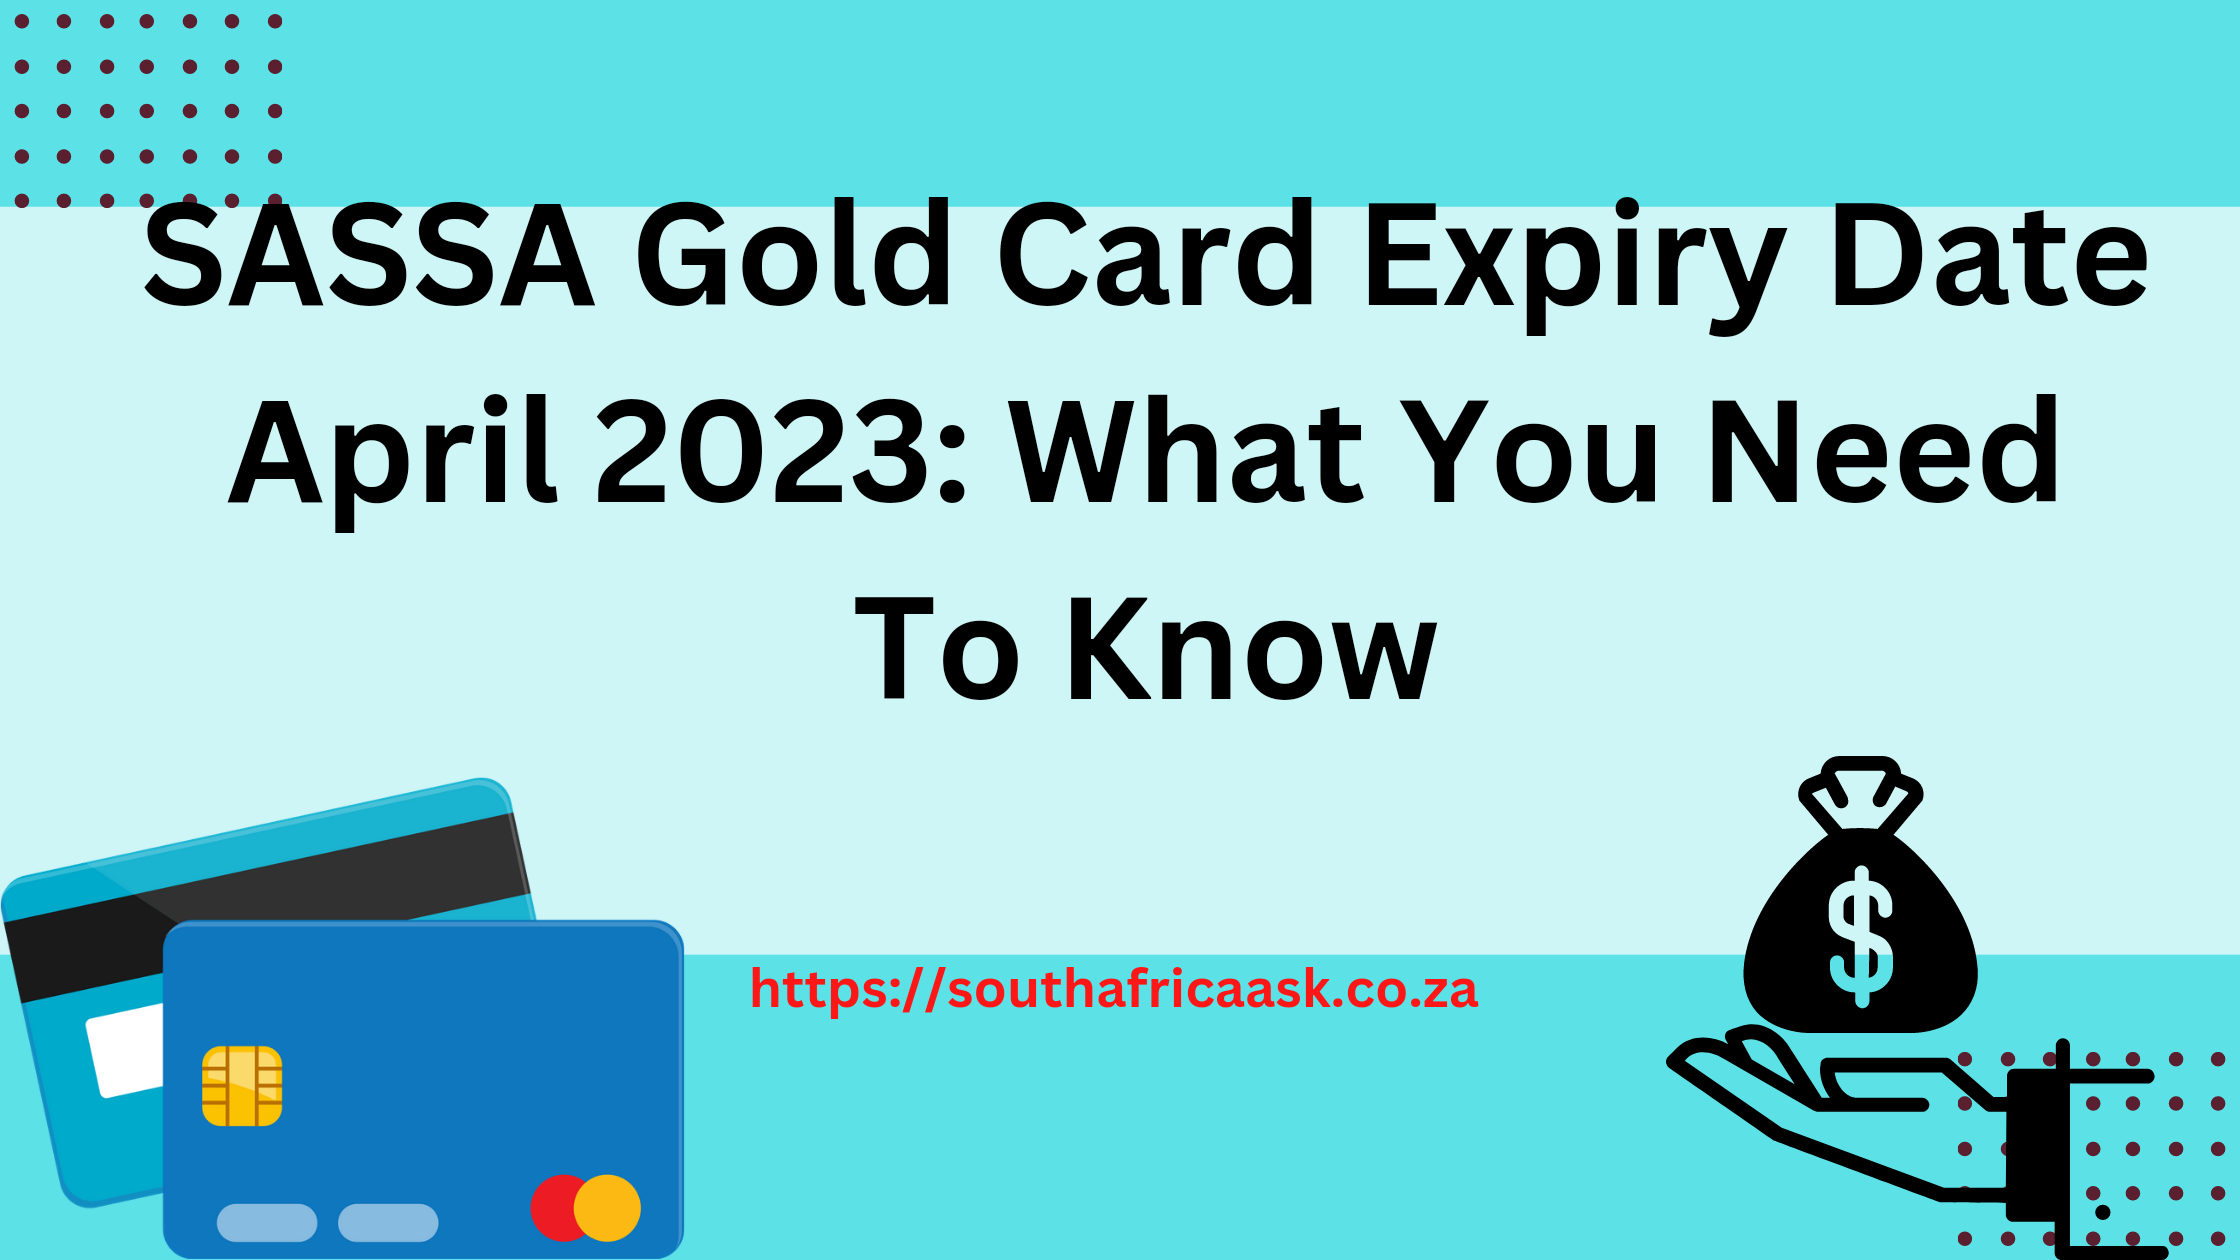 SASSA Gold Card Expiry Date April 2023: What You Need To Know